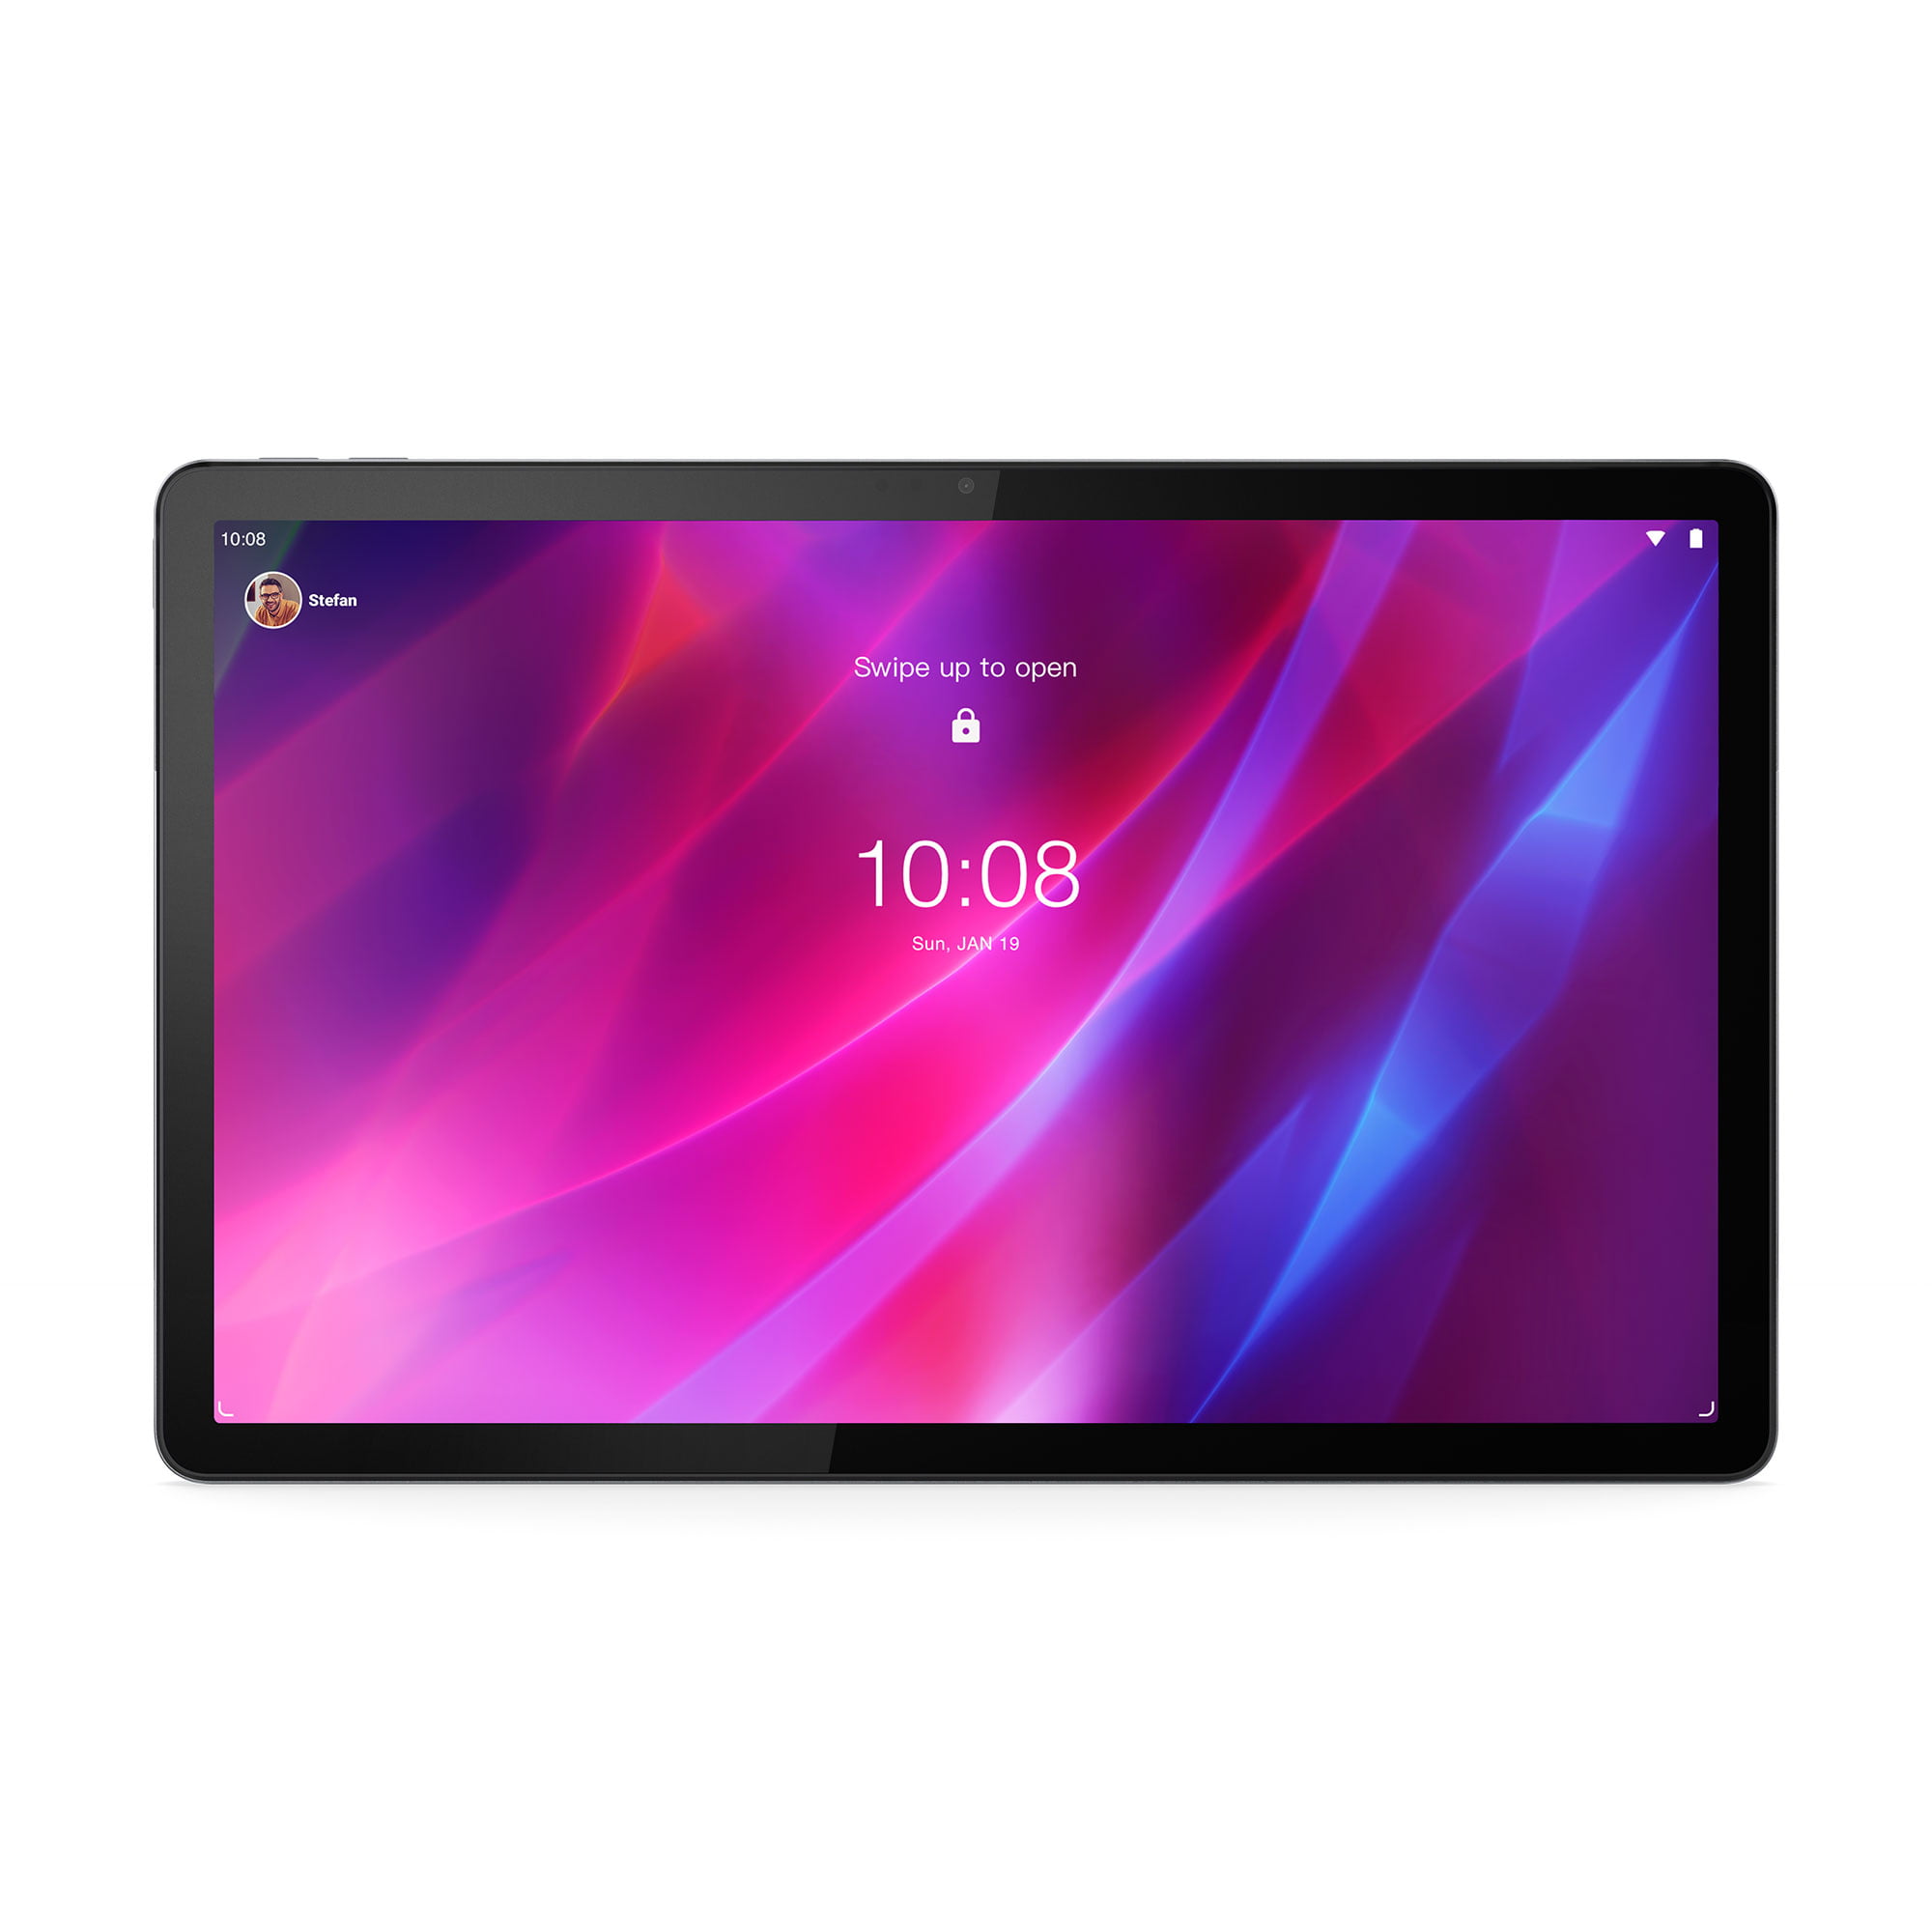 Azpen 10 inch Android 10 Q OS Google Certified Tablet 1280 x 800 